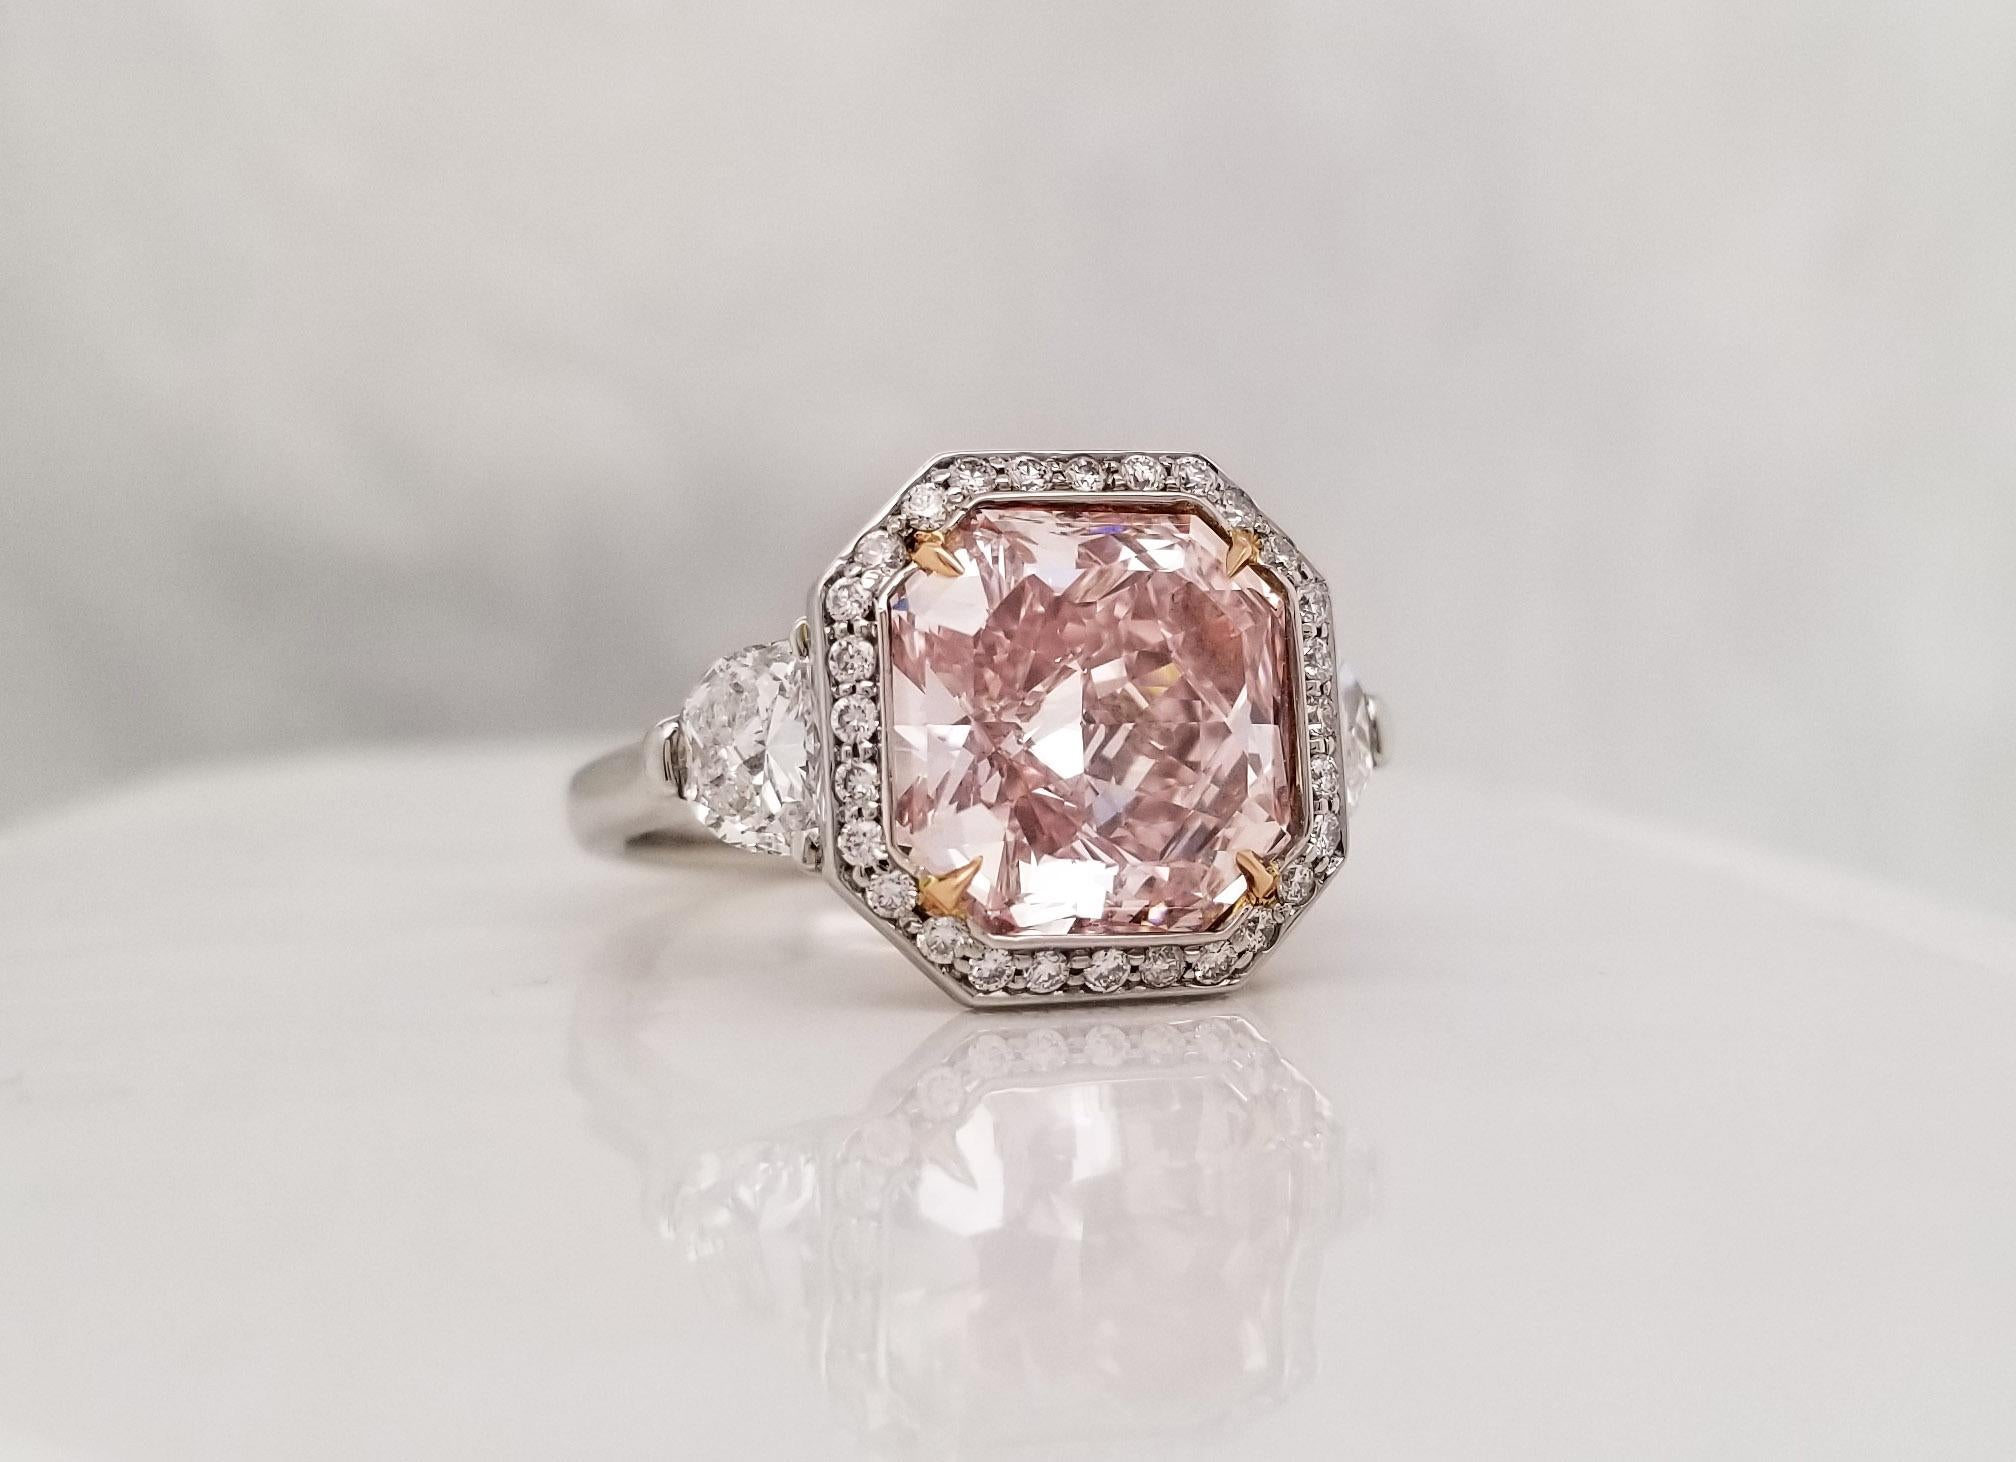 From SCARSELLI this rare natural Fancy Light Pink radiant diamond of 4 carats, VVS1 clarity mounted with a halo of round white diamonds 0.28 carats. The center diamond is accompanied by a GIA grading report (see certificate picture for detailed